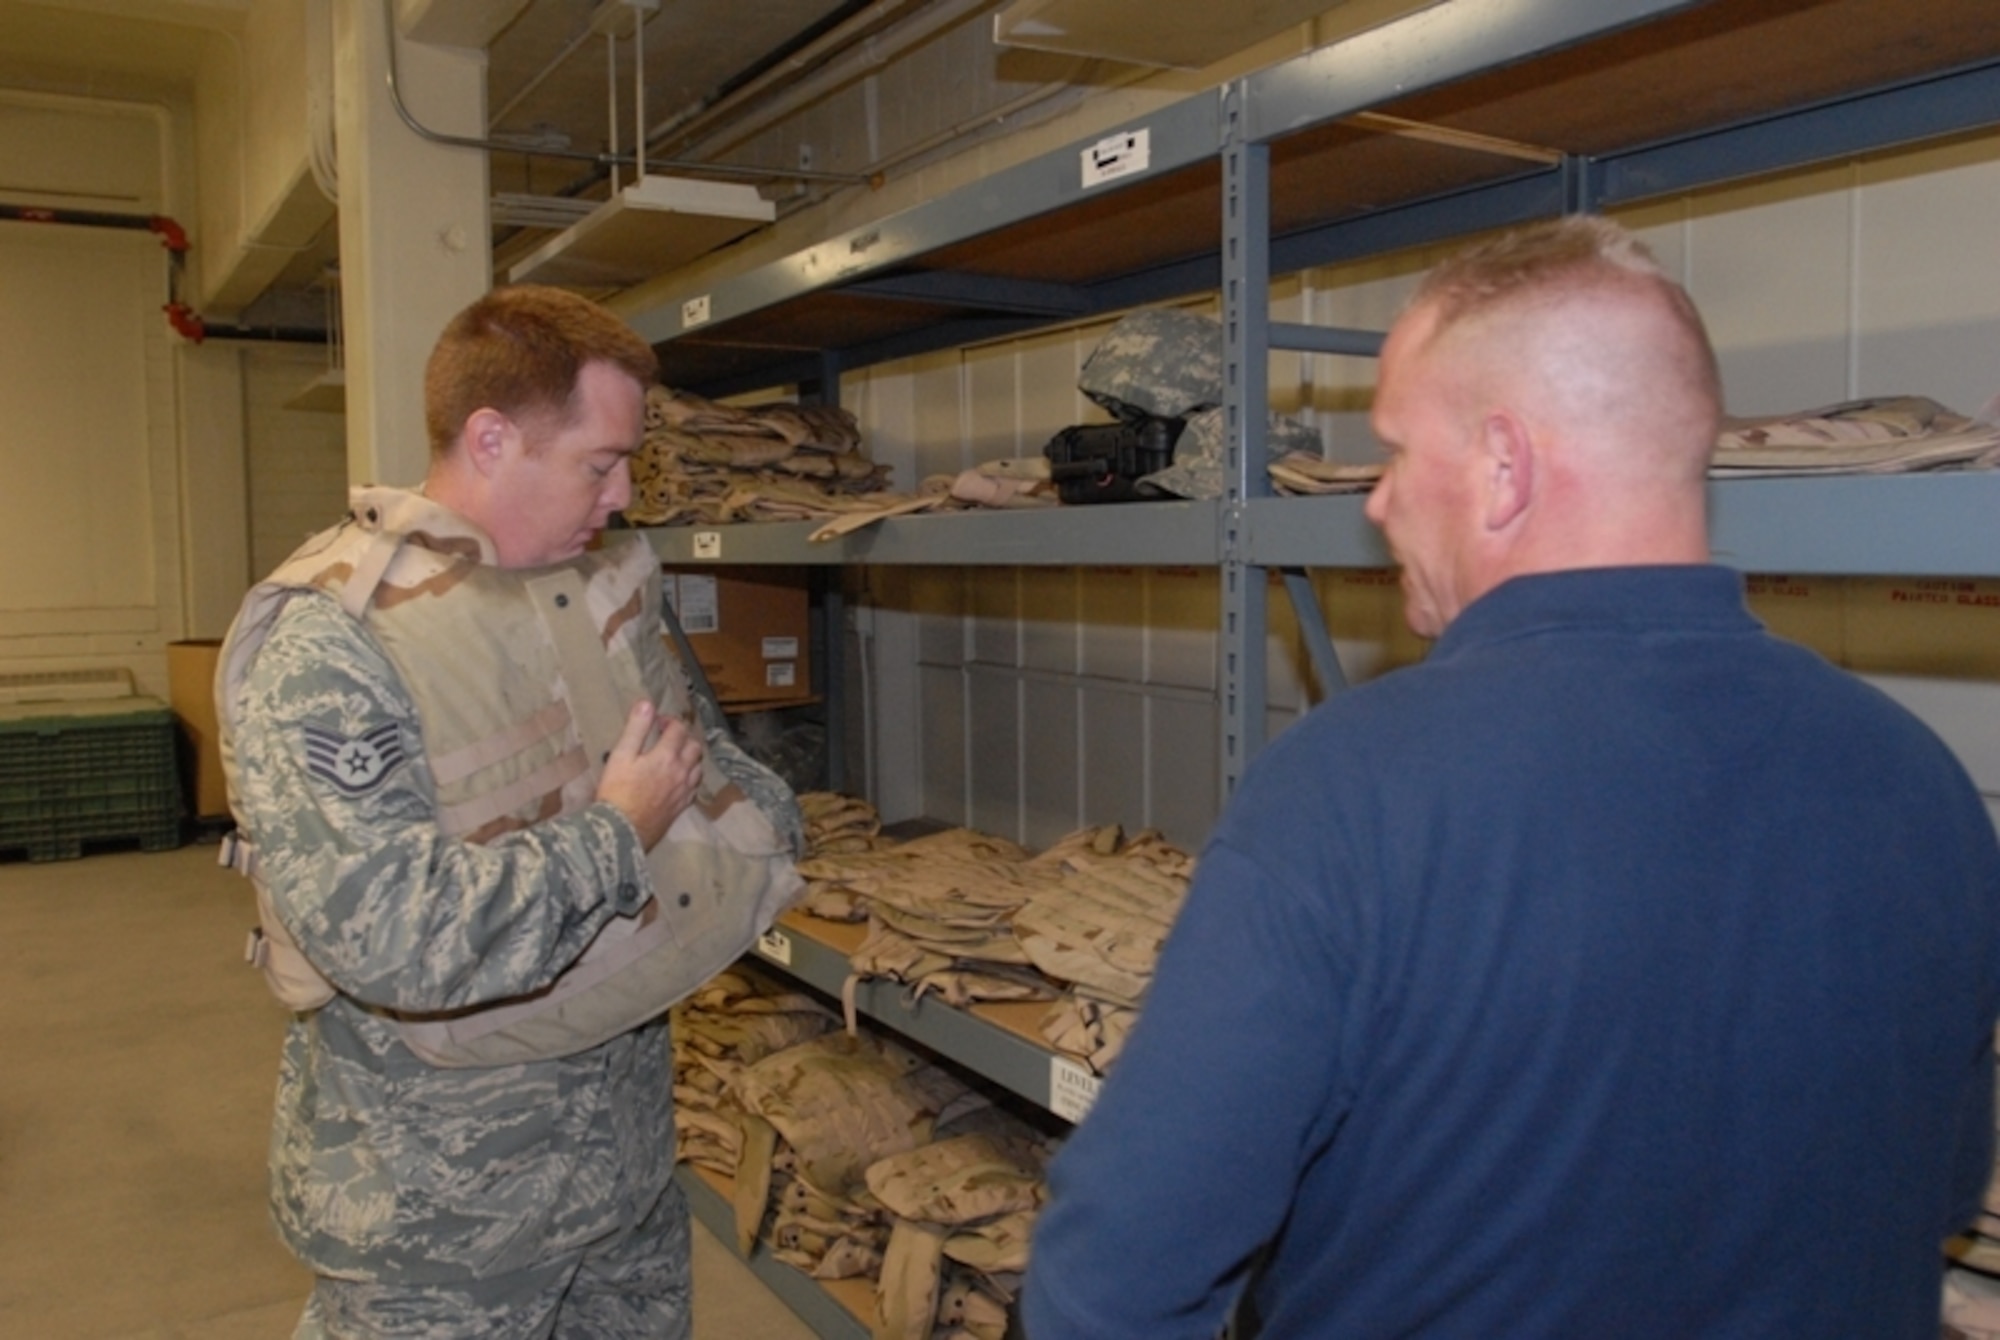 Staff Sgt. Chad Manson,  17th Contracting Squadron, tries on body armor at the Vance Deployment Center while David Swanson, 17th Logistics Readiness Squadron, stands by to assist him with getting the proper size June 15. (U.S. Air Force photo/Master Sgt. Randy Mallard)